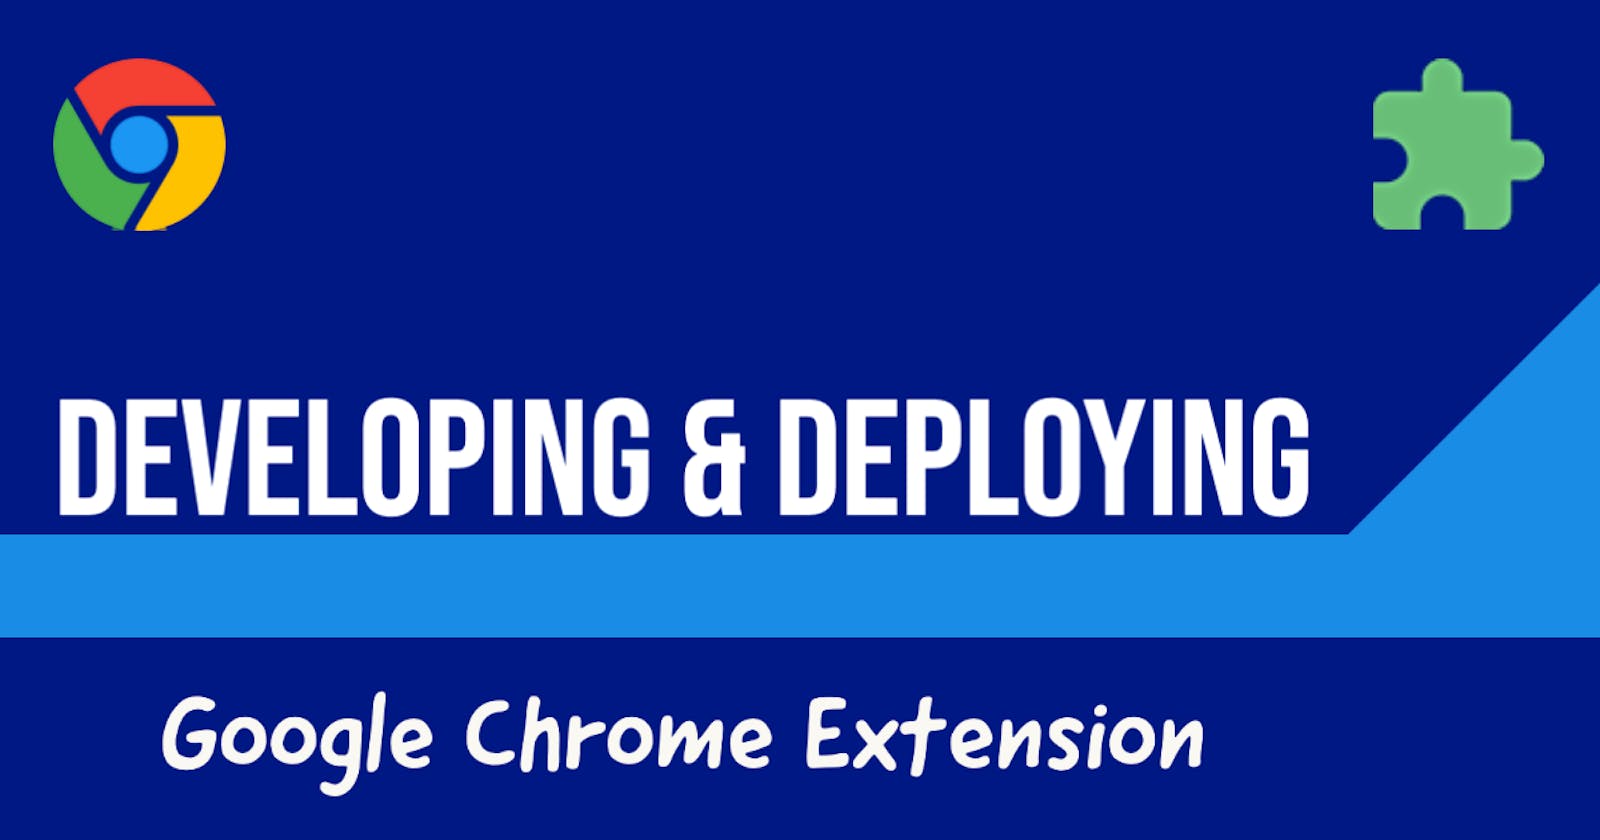 Developing & Deploying a Google Chrome Extension